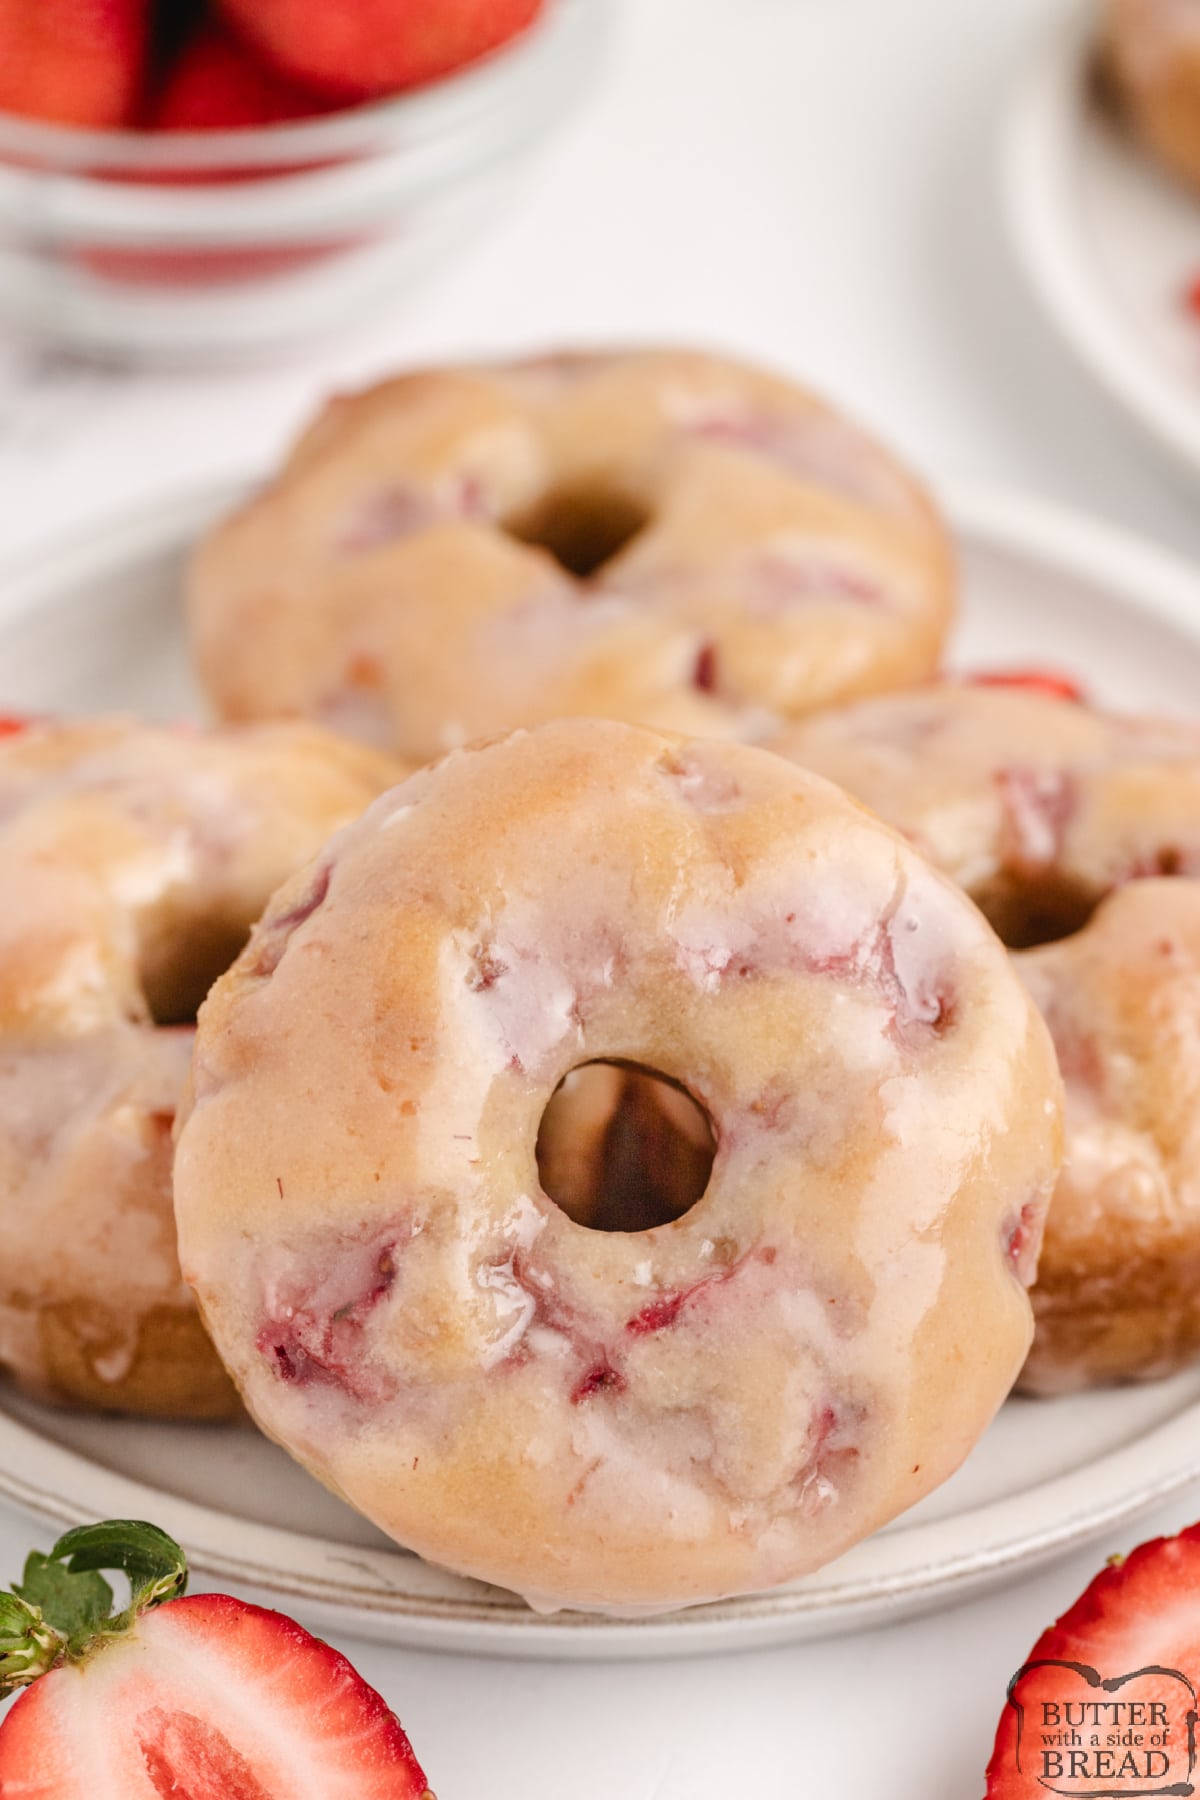 Baked Strawberry Donuts are made completely from scratch with fresh strawberries and a simple strawberry glaze. 